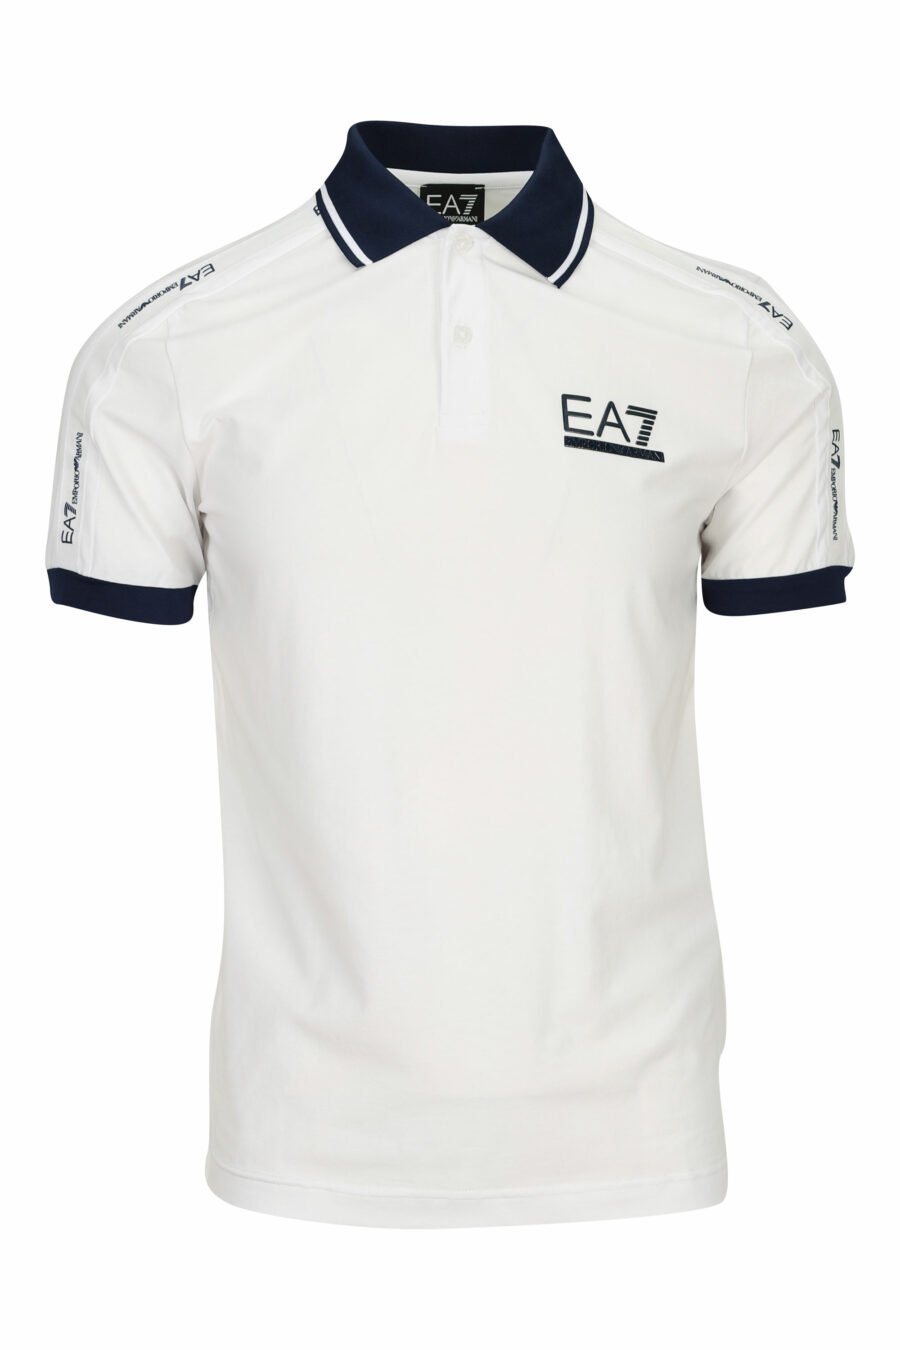 White polo shirt with mini logo "lux identity" on shoulder band - 8058947458868 1